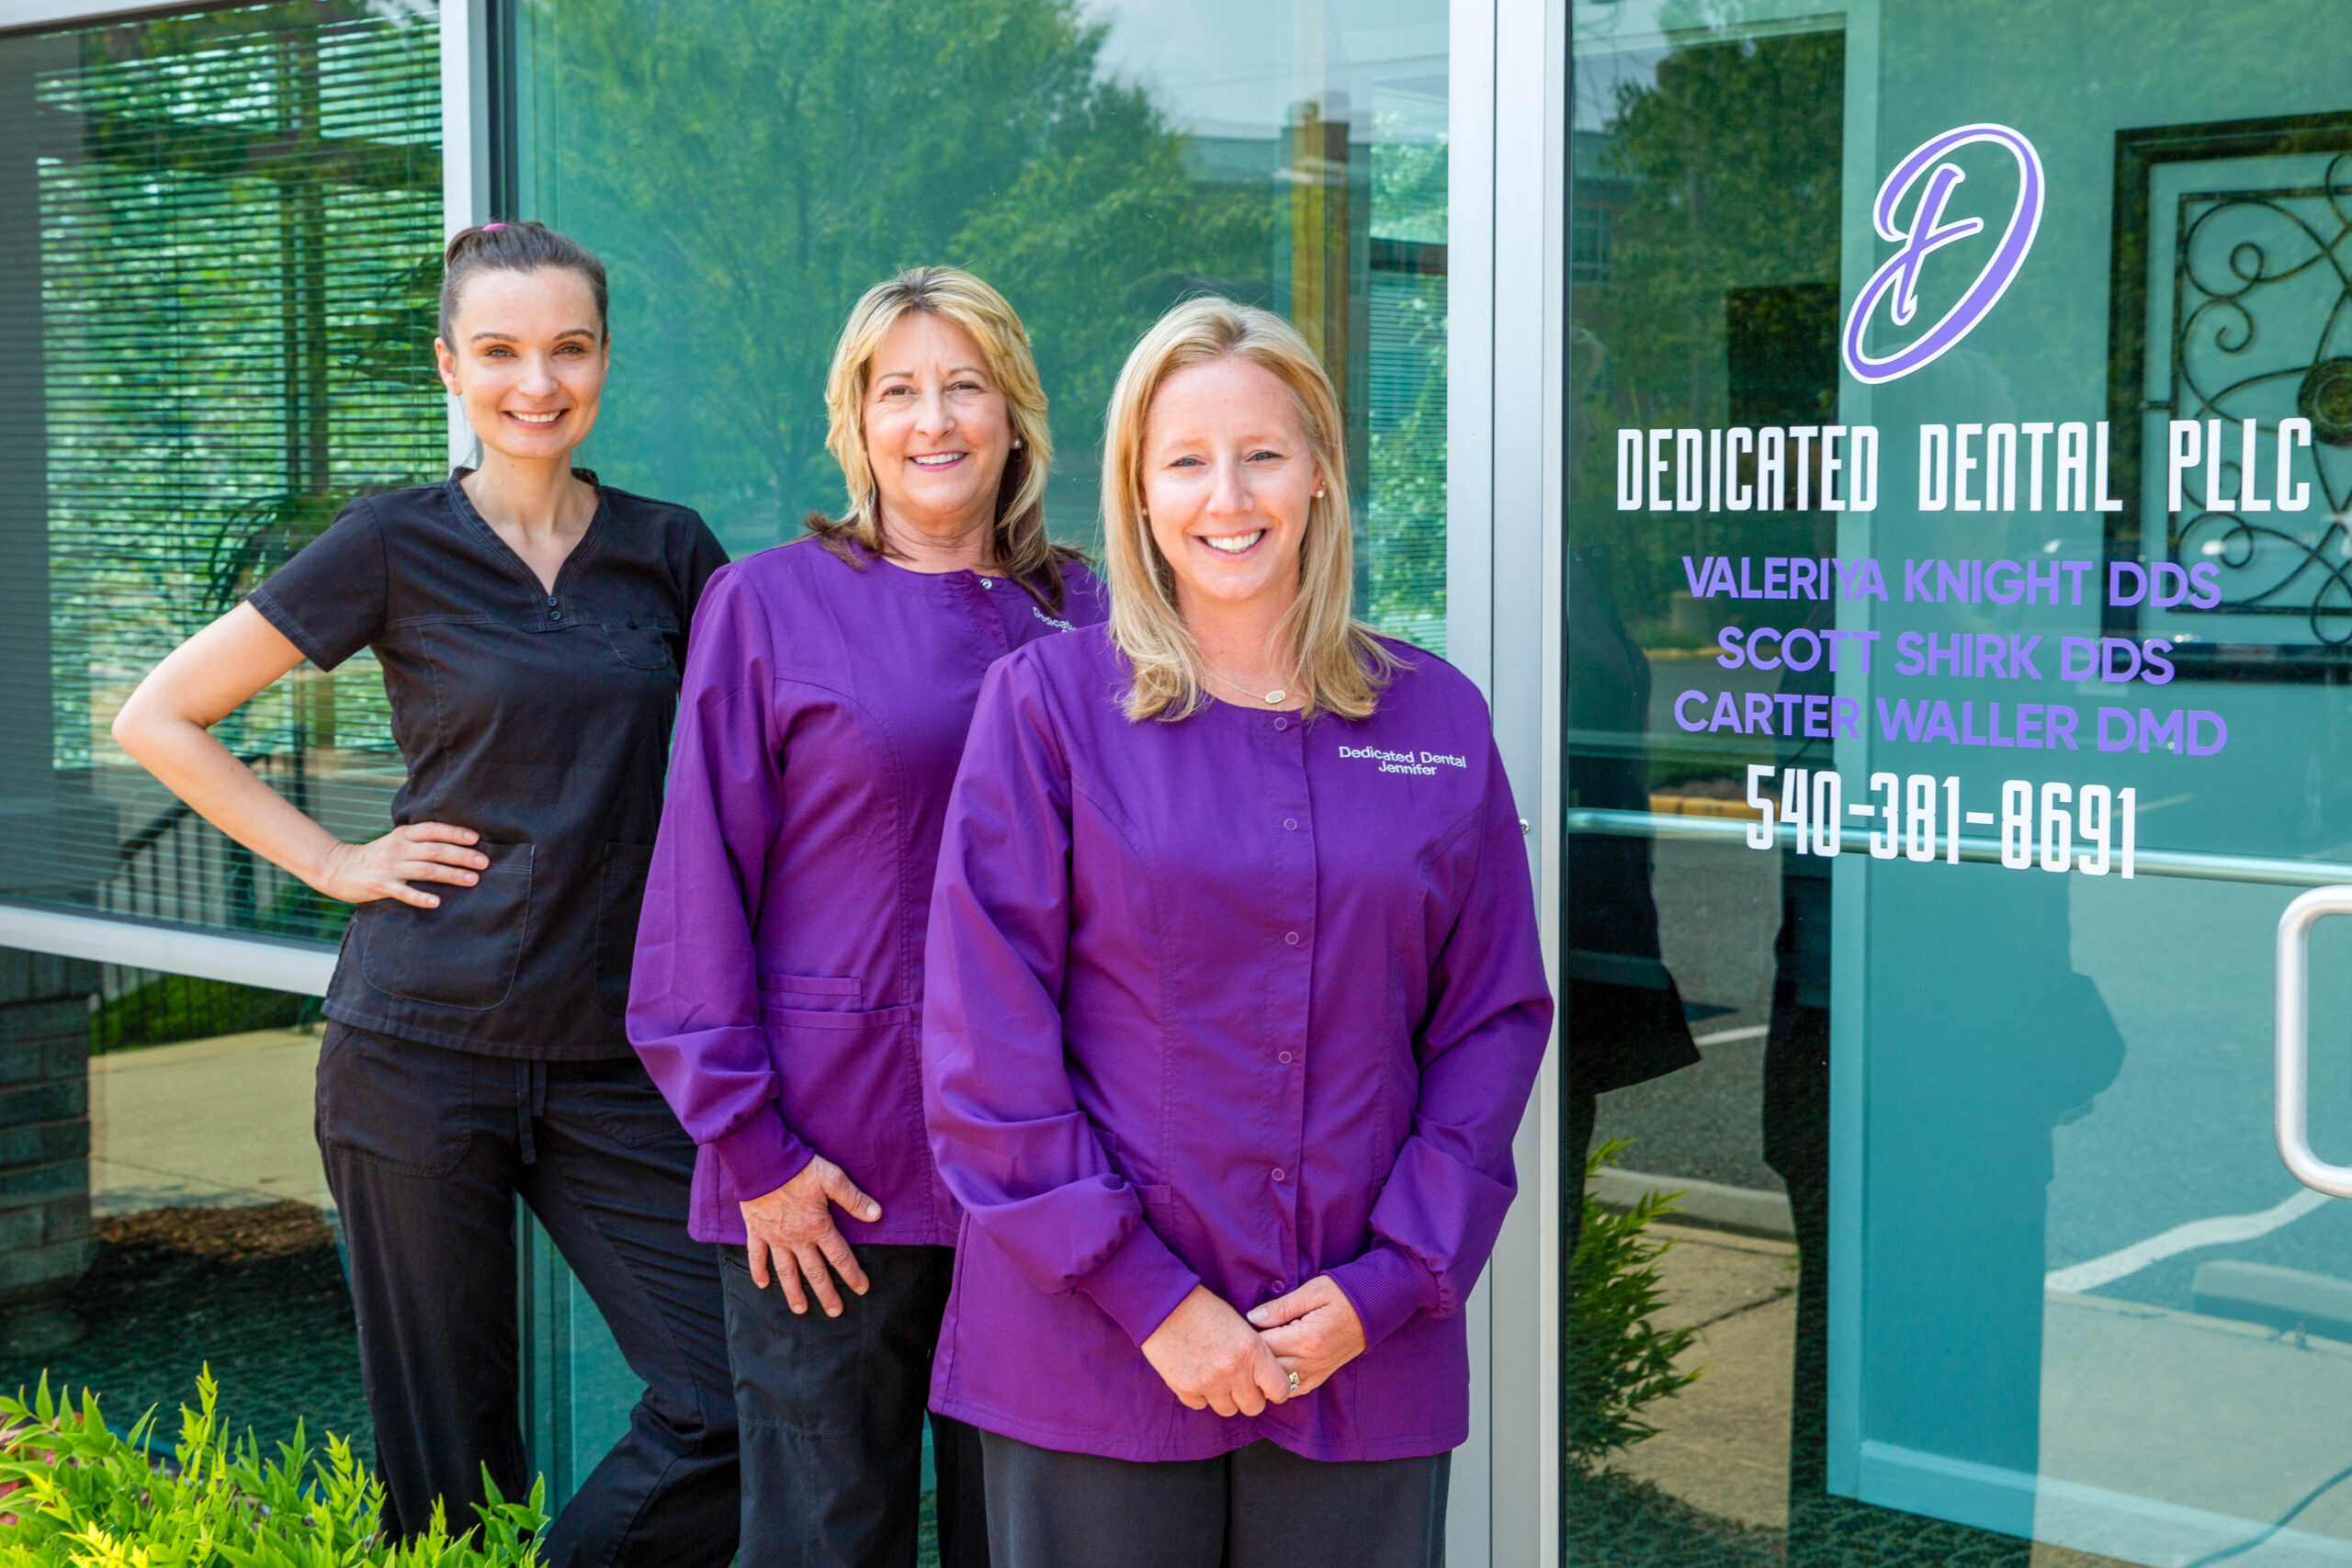 the Dedicated Dental team in Stafford VA contact us